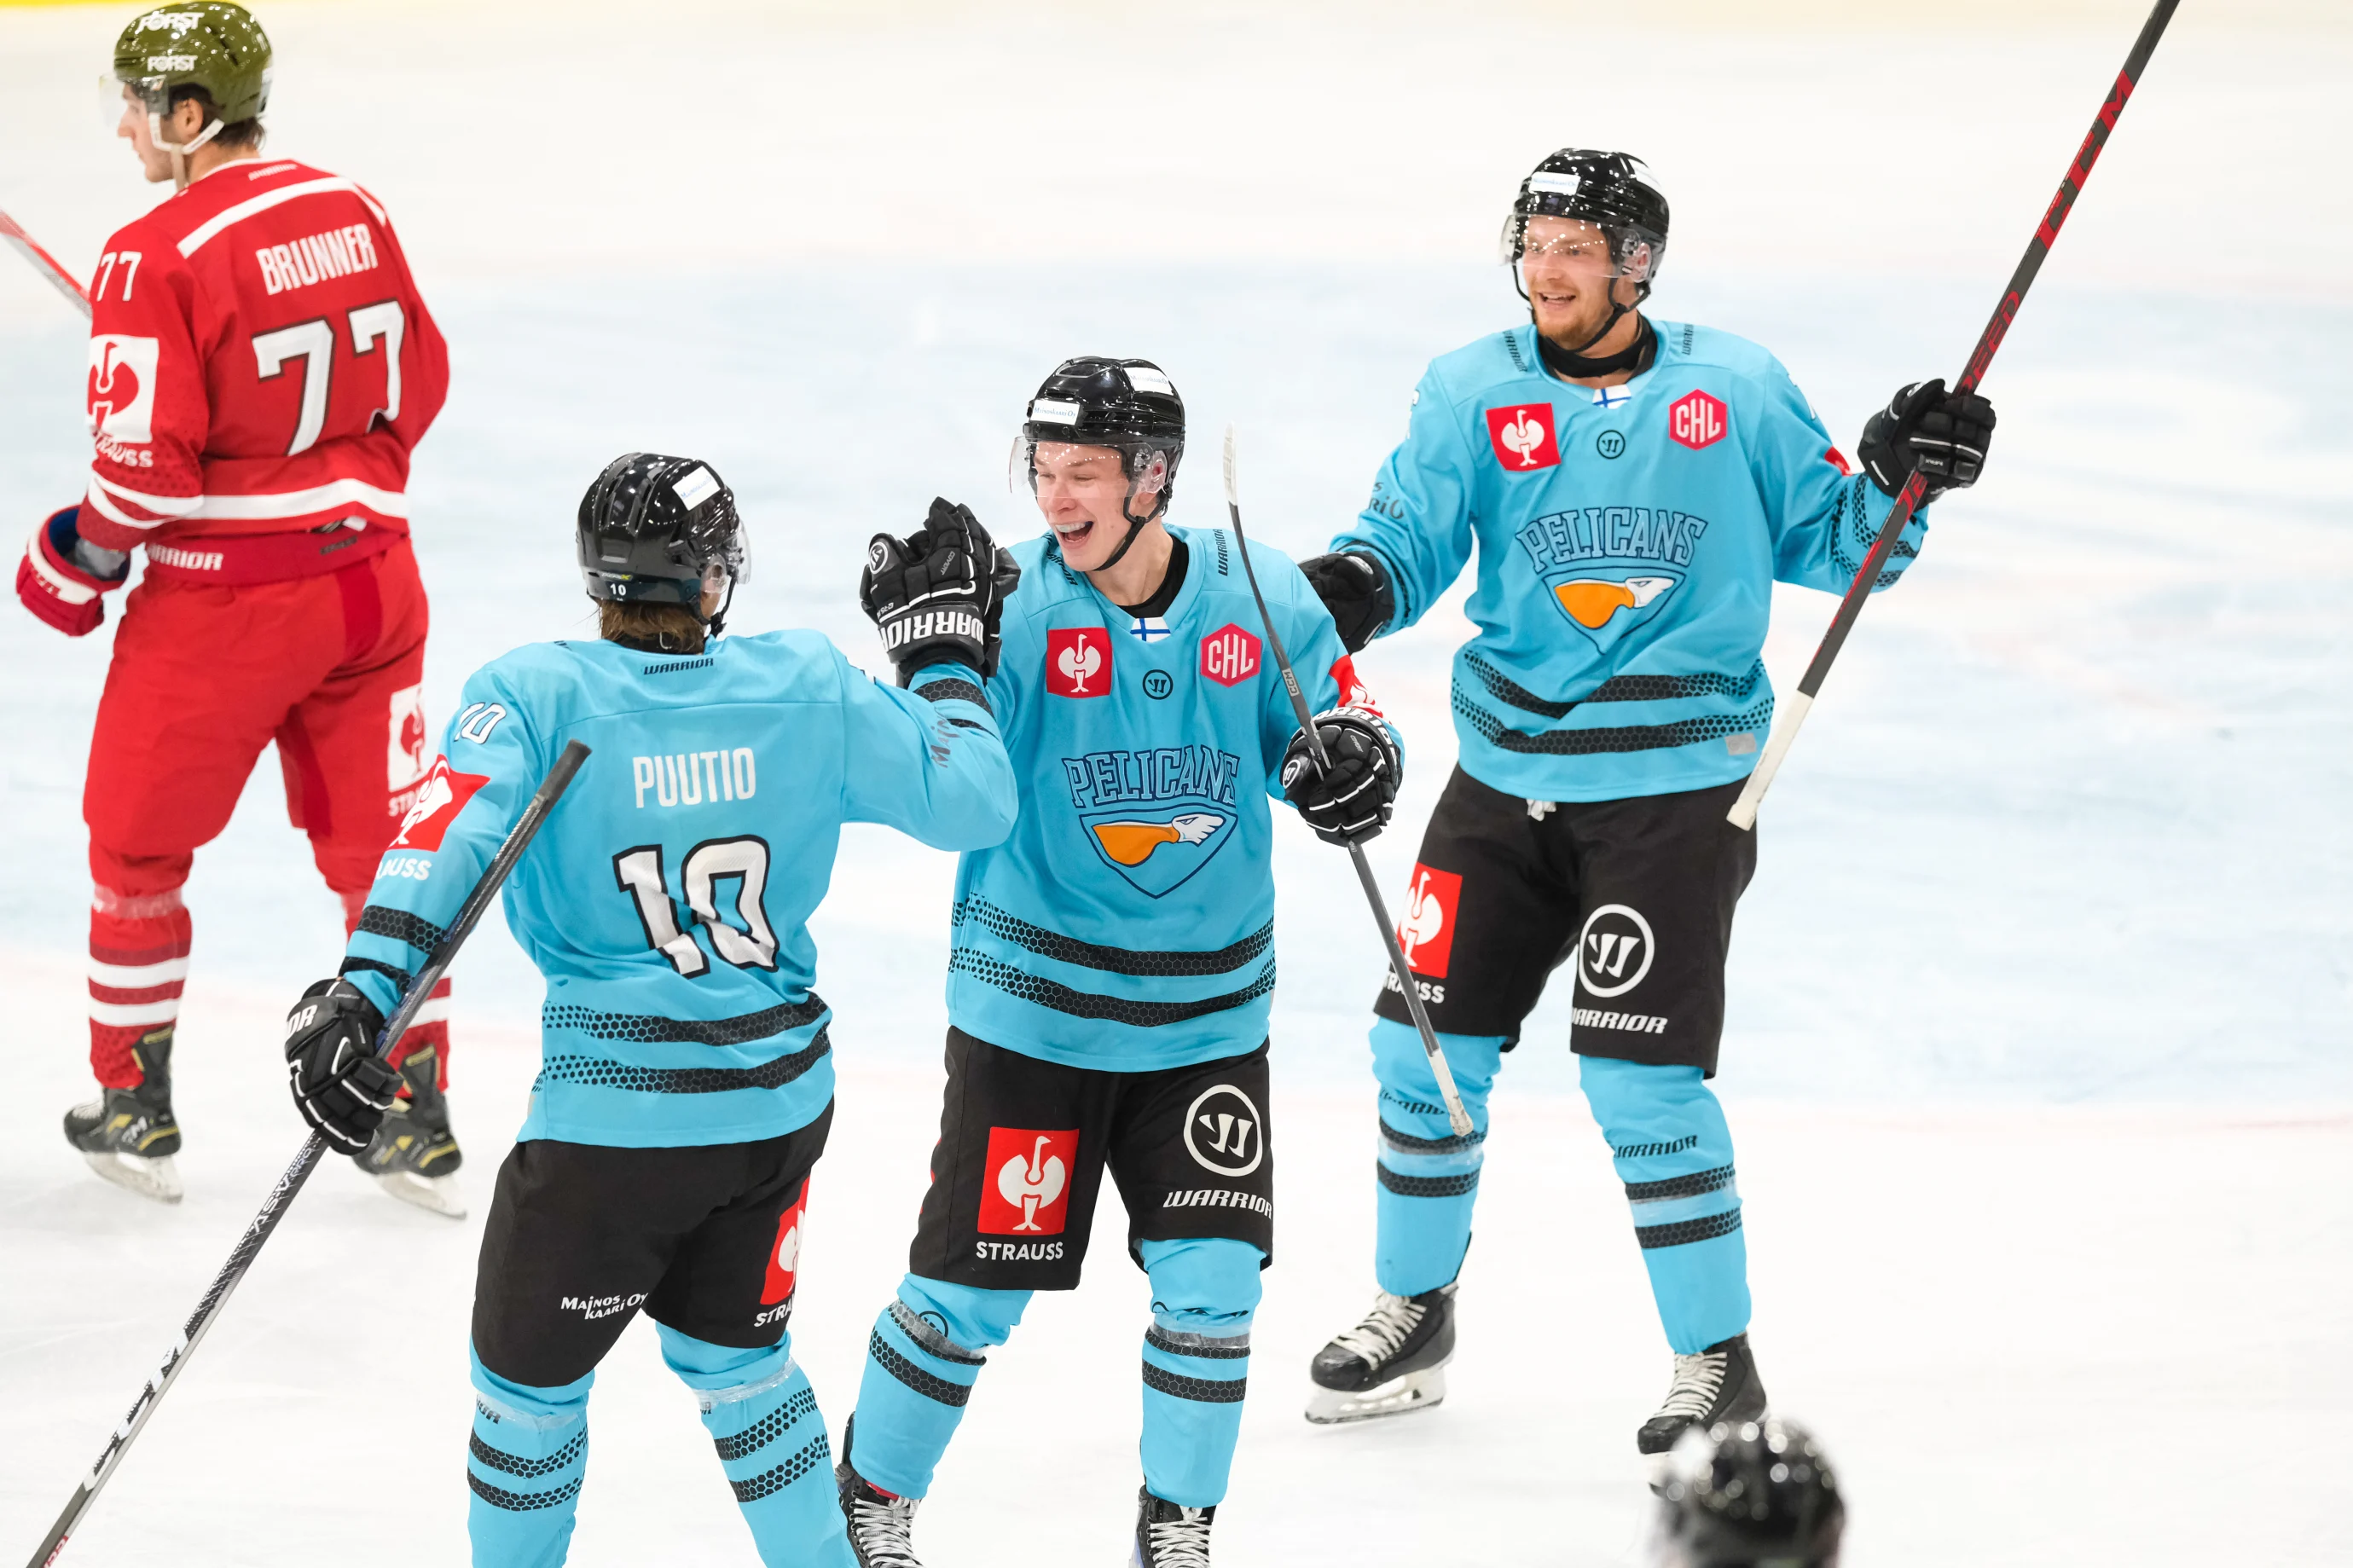 Lahti Pelicans - Champions Hockey League Shop powered by Warrior